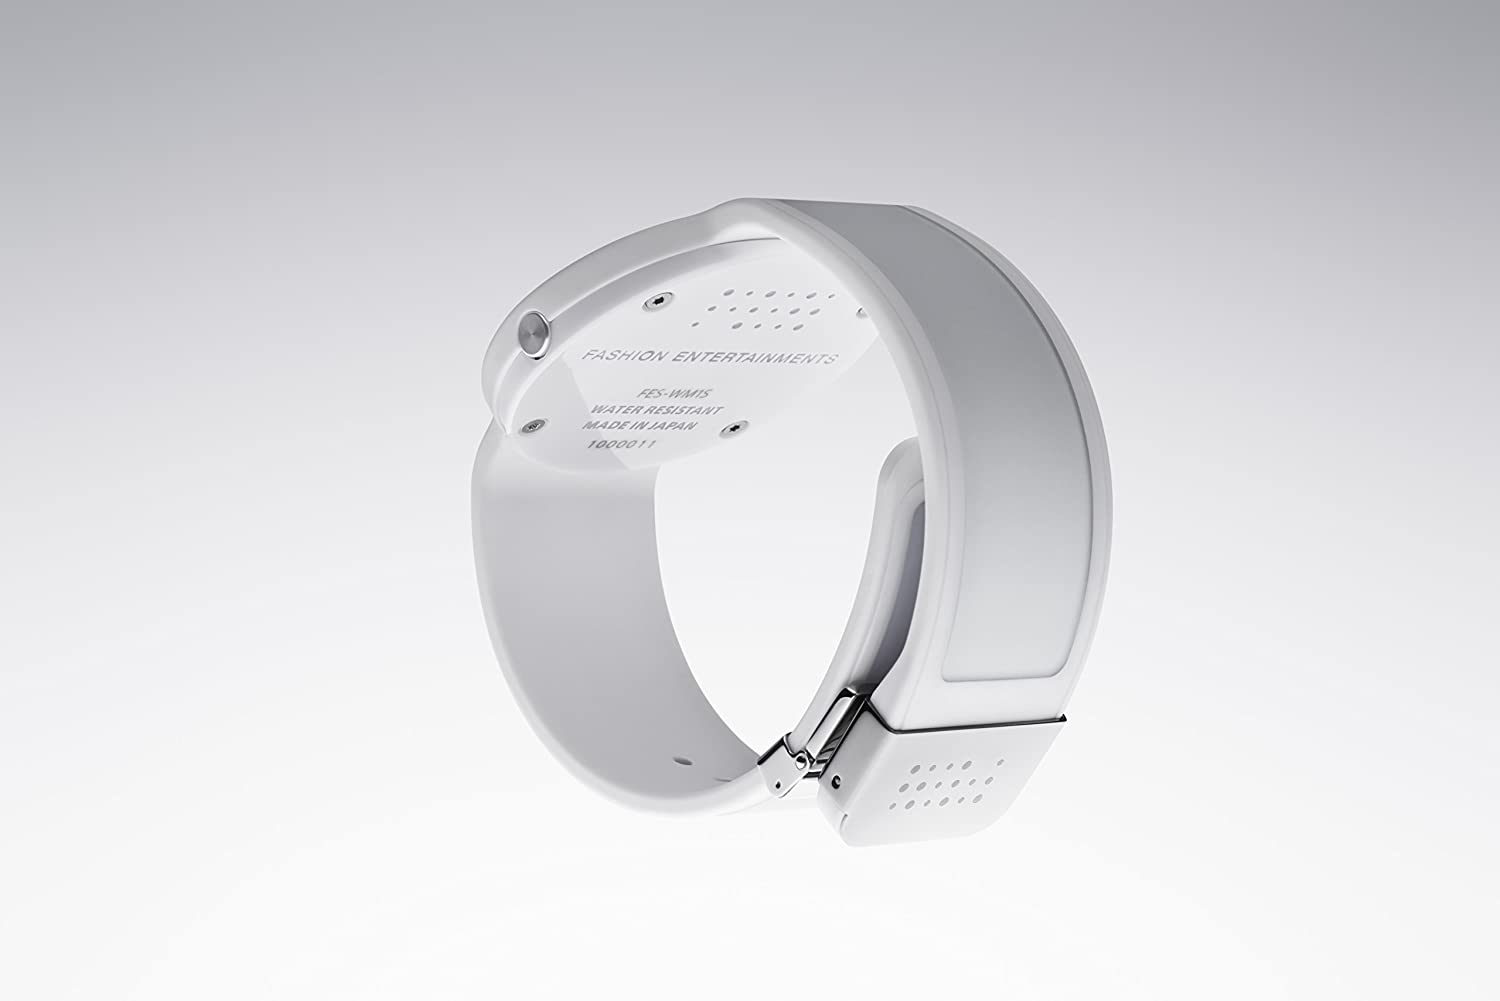 Sony Fes Watch U, E-Paper Design Watch with Customisable Face and Strap -  Silver : Amazon.ae: Fashion